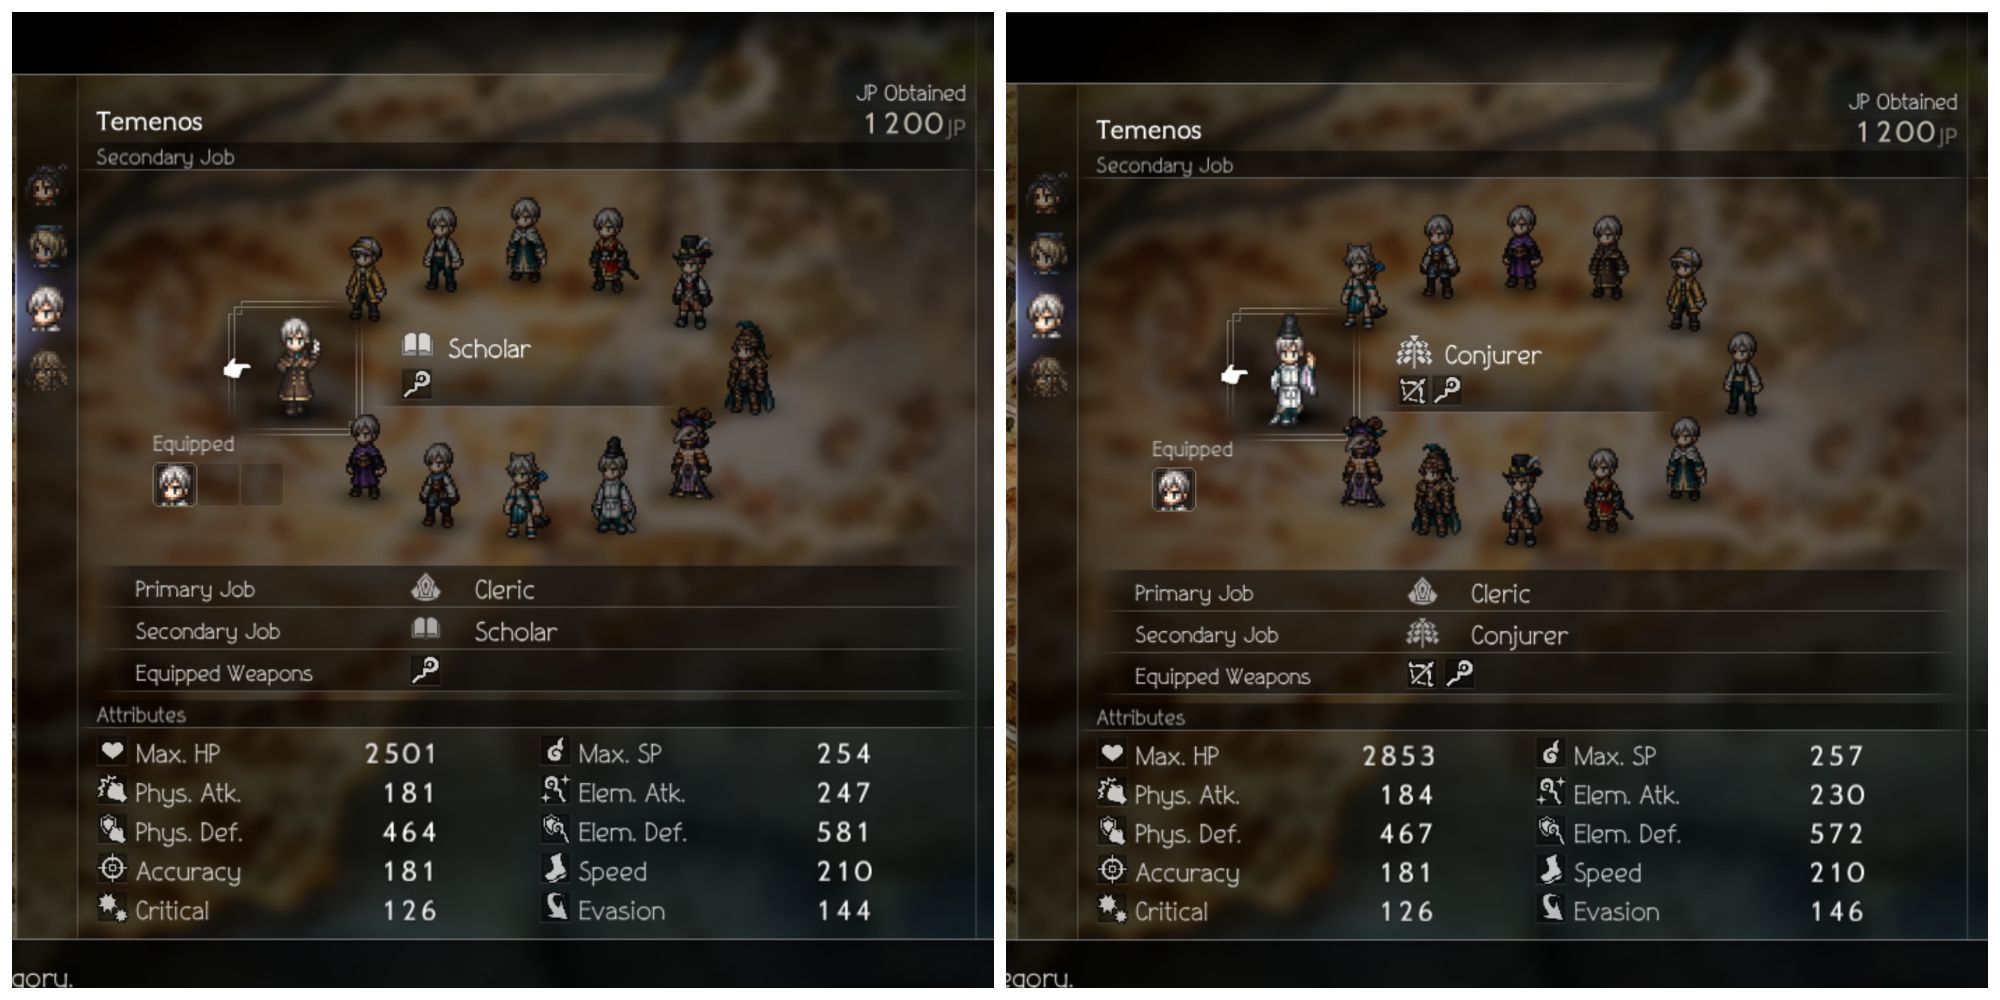 Temenos Side Job Choices In Octopath Traveler 2, Seeker And Conjurer